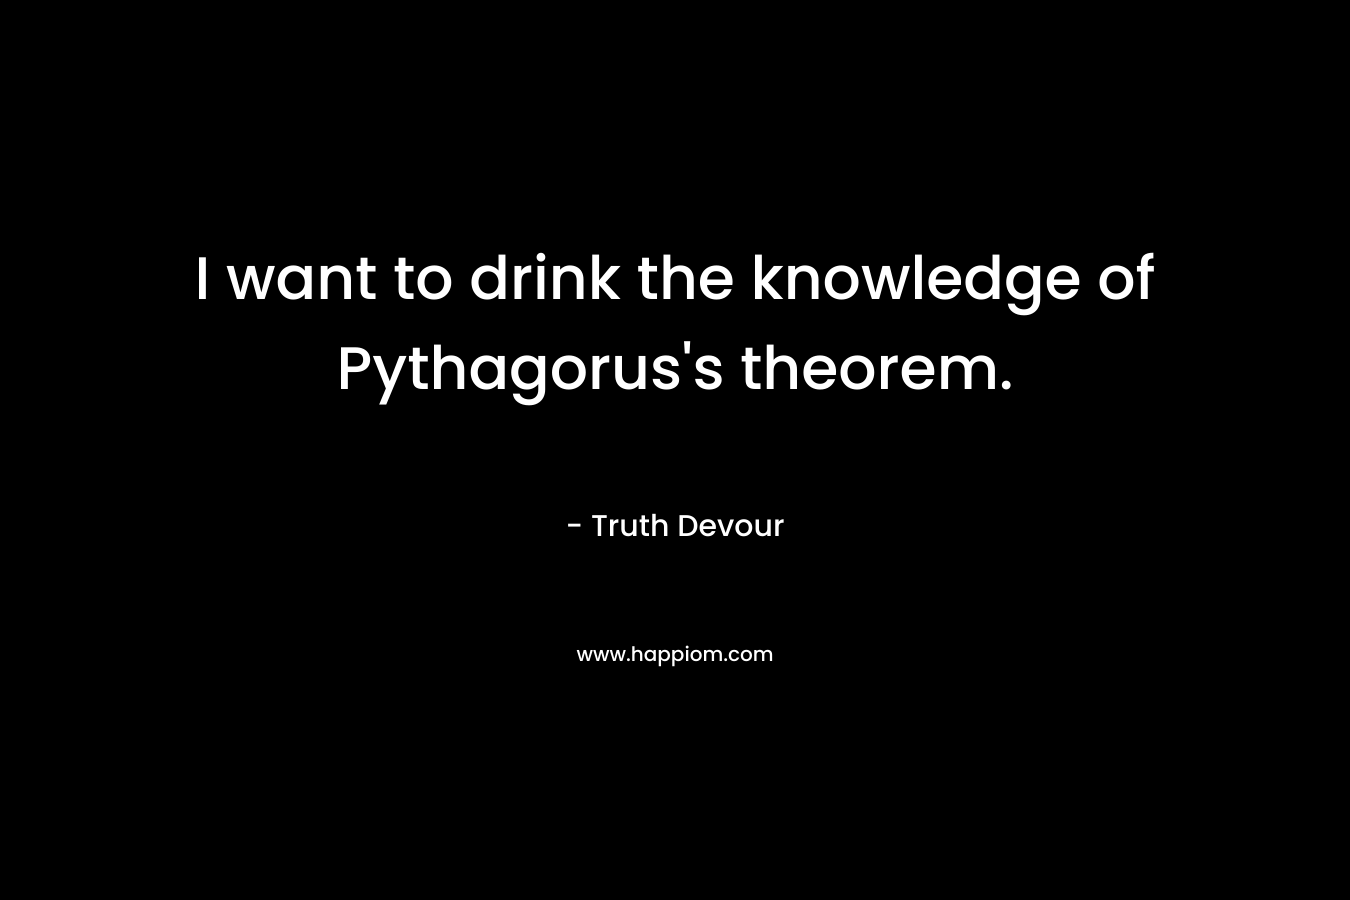 I want to drink the knowledge of Pythagorus's theorem.